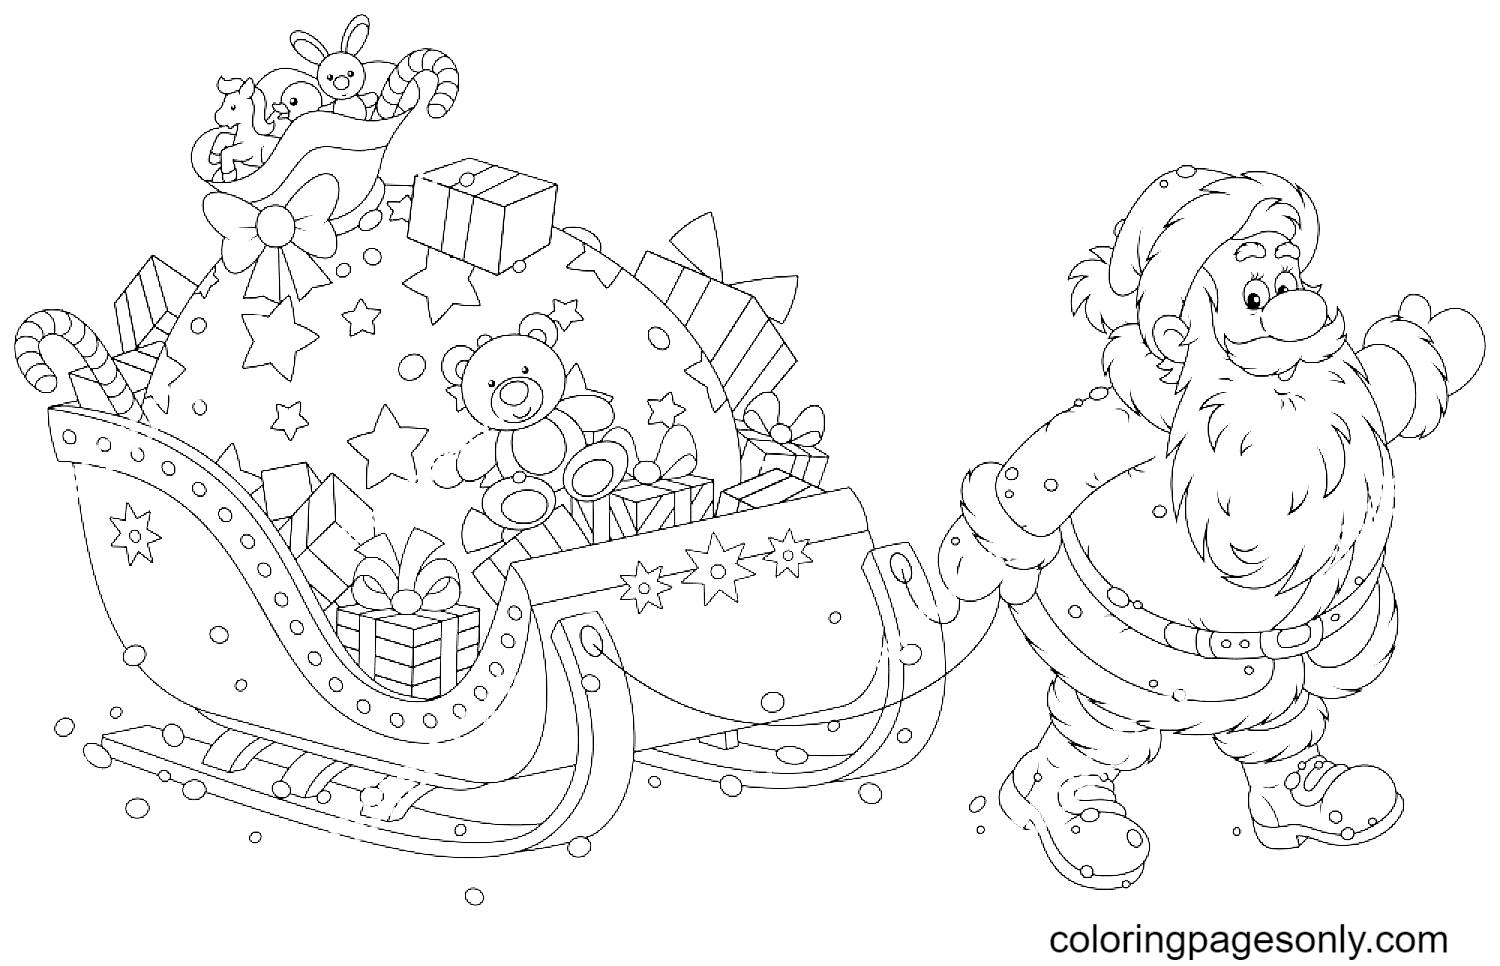 Santa Claus Carrying A Big Bag Of Christmas Gifts On Sledge Coloring Pages